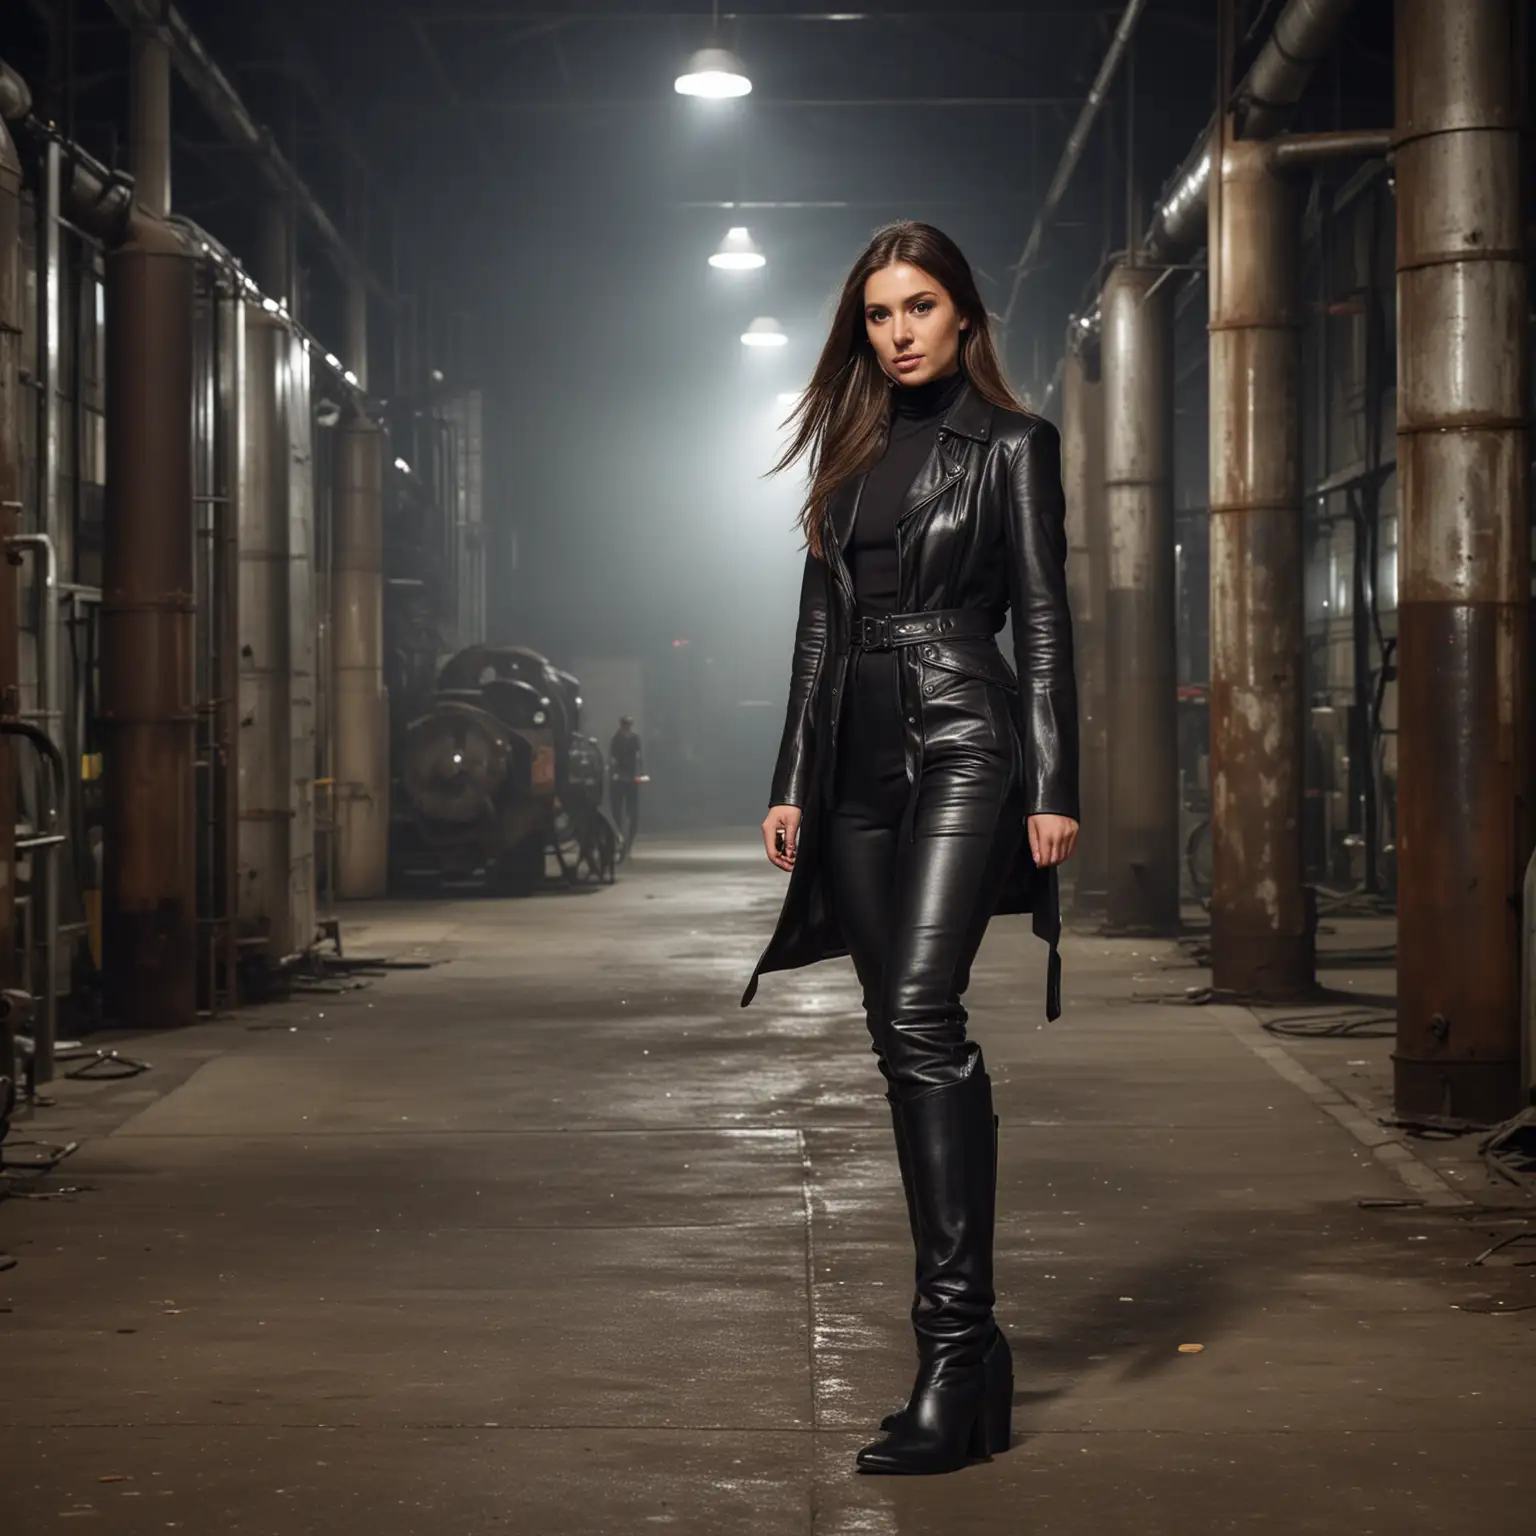 Brunette Woman in Leather Walking in Old Factory at Night